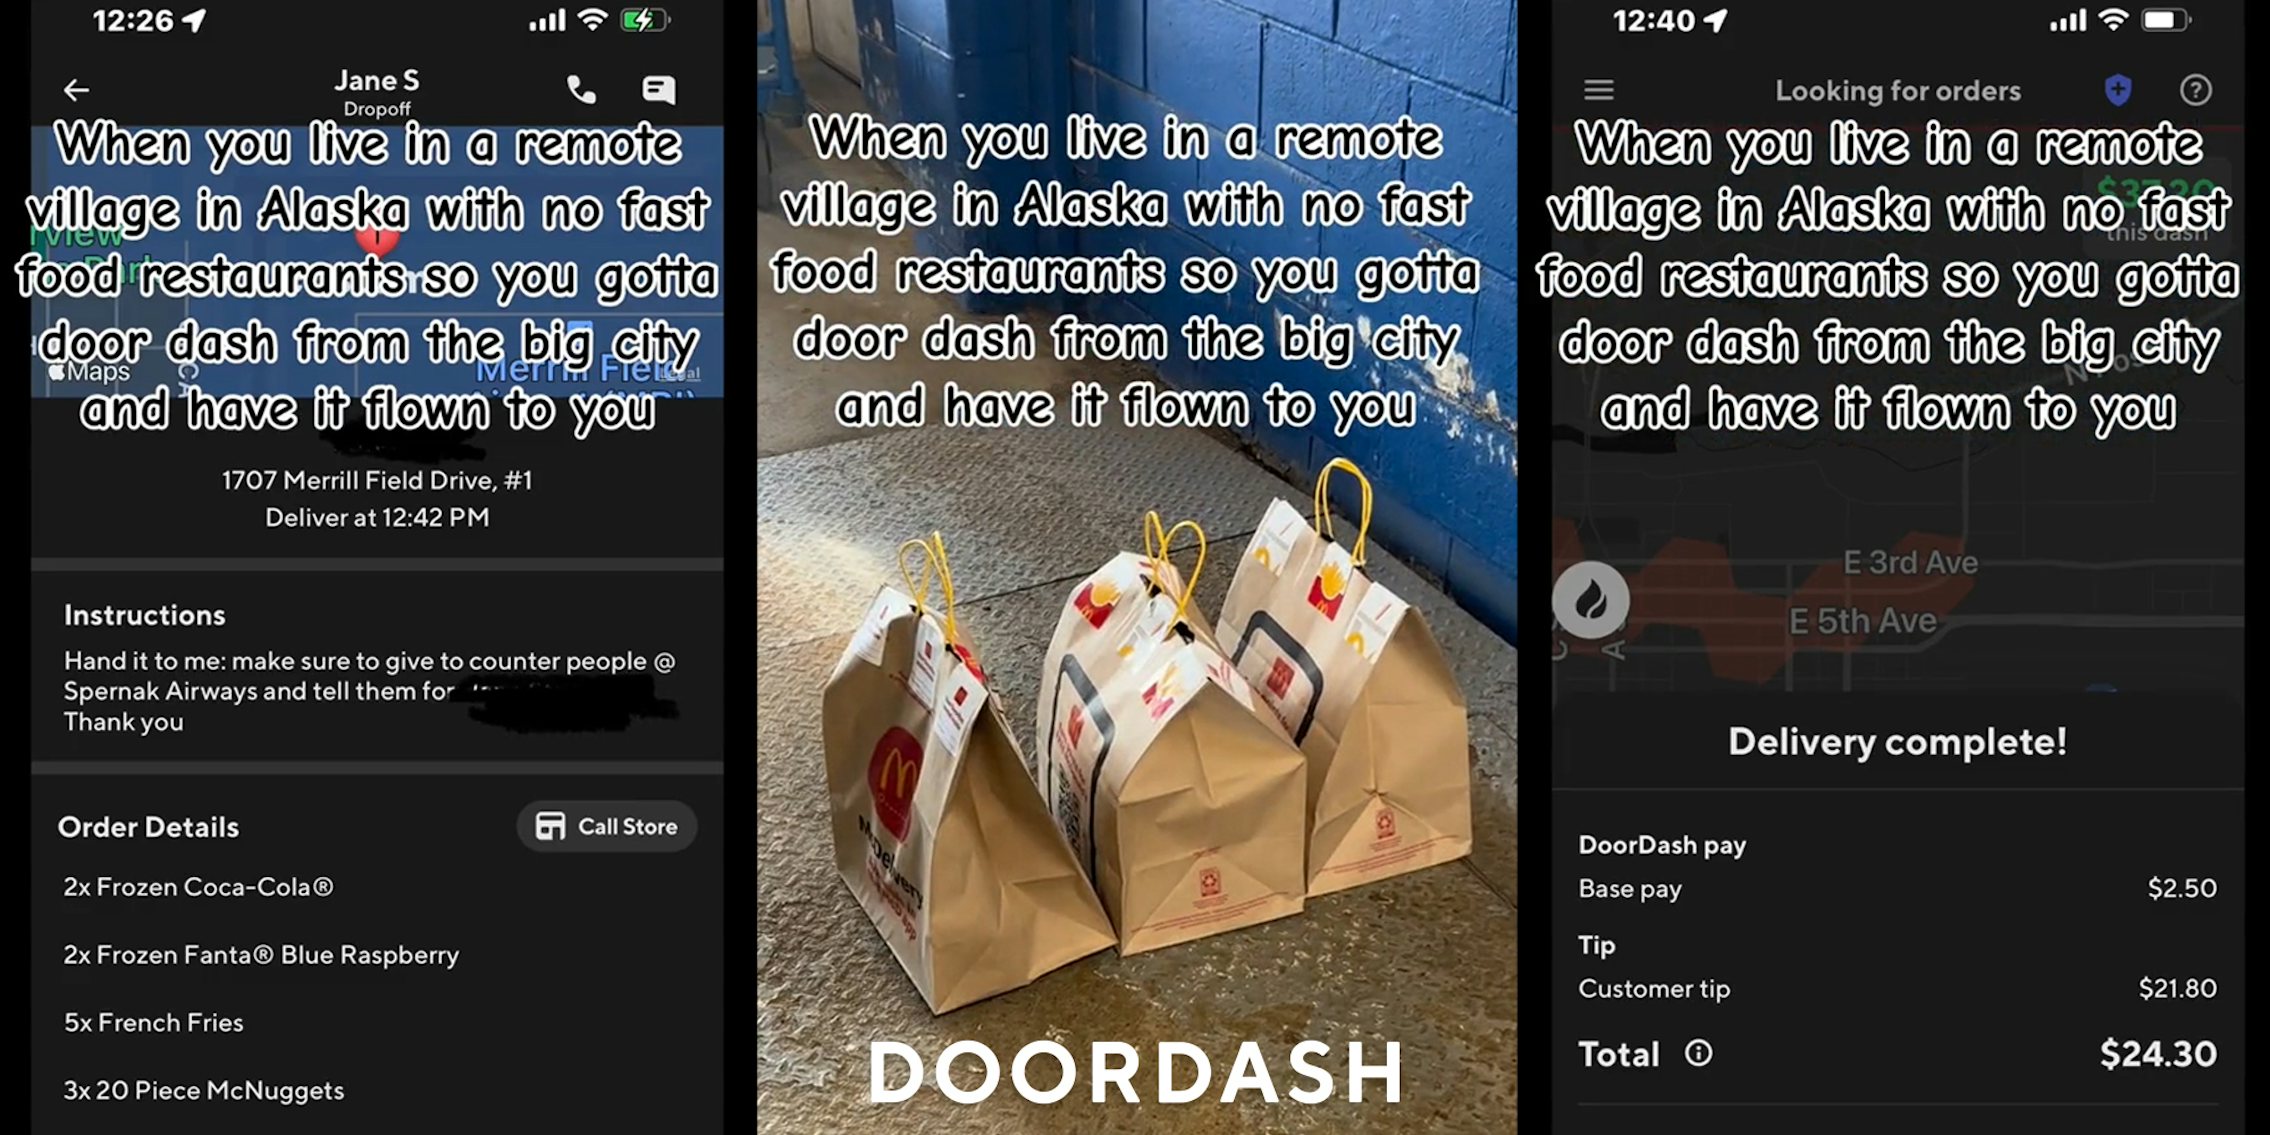 DoorDash order on screen with caption 'When you live in a remote village in Alaska with no fast food restaurants so you gotta door dash from the big city and have it flown to you' (l) McDonald's bags DoorDash delivery with DoorDash logo at bottom with caption 'When you live in a remote village in Alaska with no fast food restaurants so you gotta door dash from the big city and have it flown to you' (c) DoorDash order on screen with caption 'When you live in a remote village in Alaska with no fast food restaurants so you gotta door dash from the big city and have it flown to you' (r)